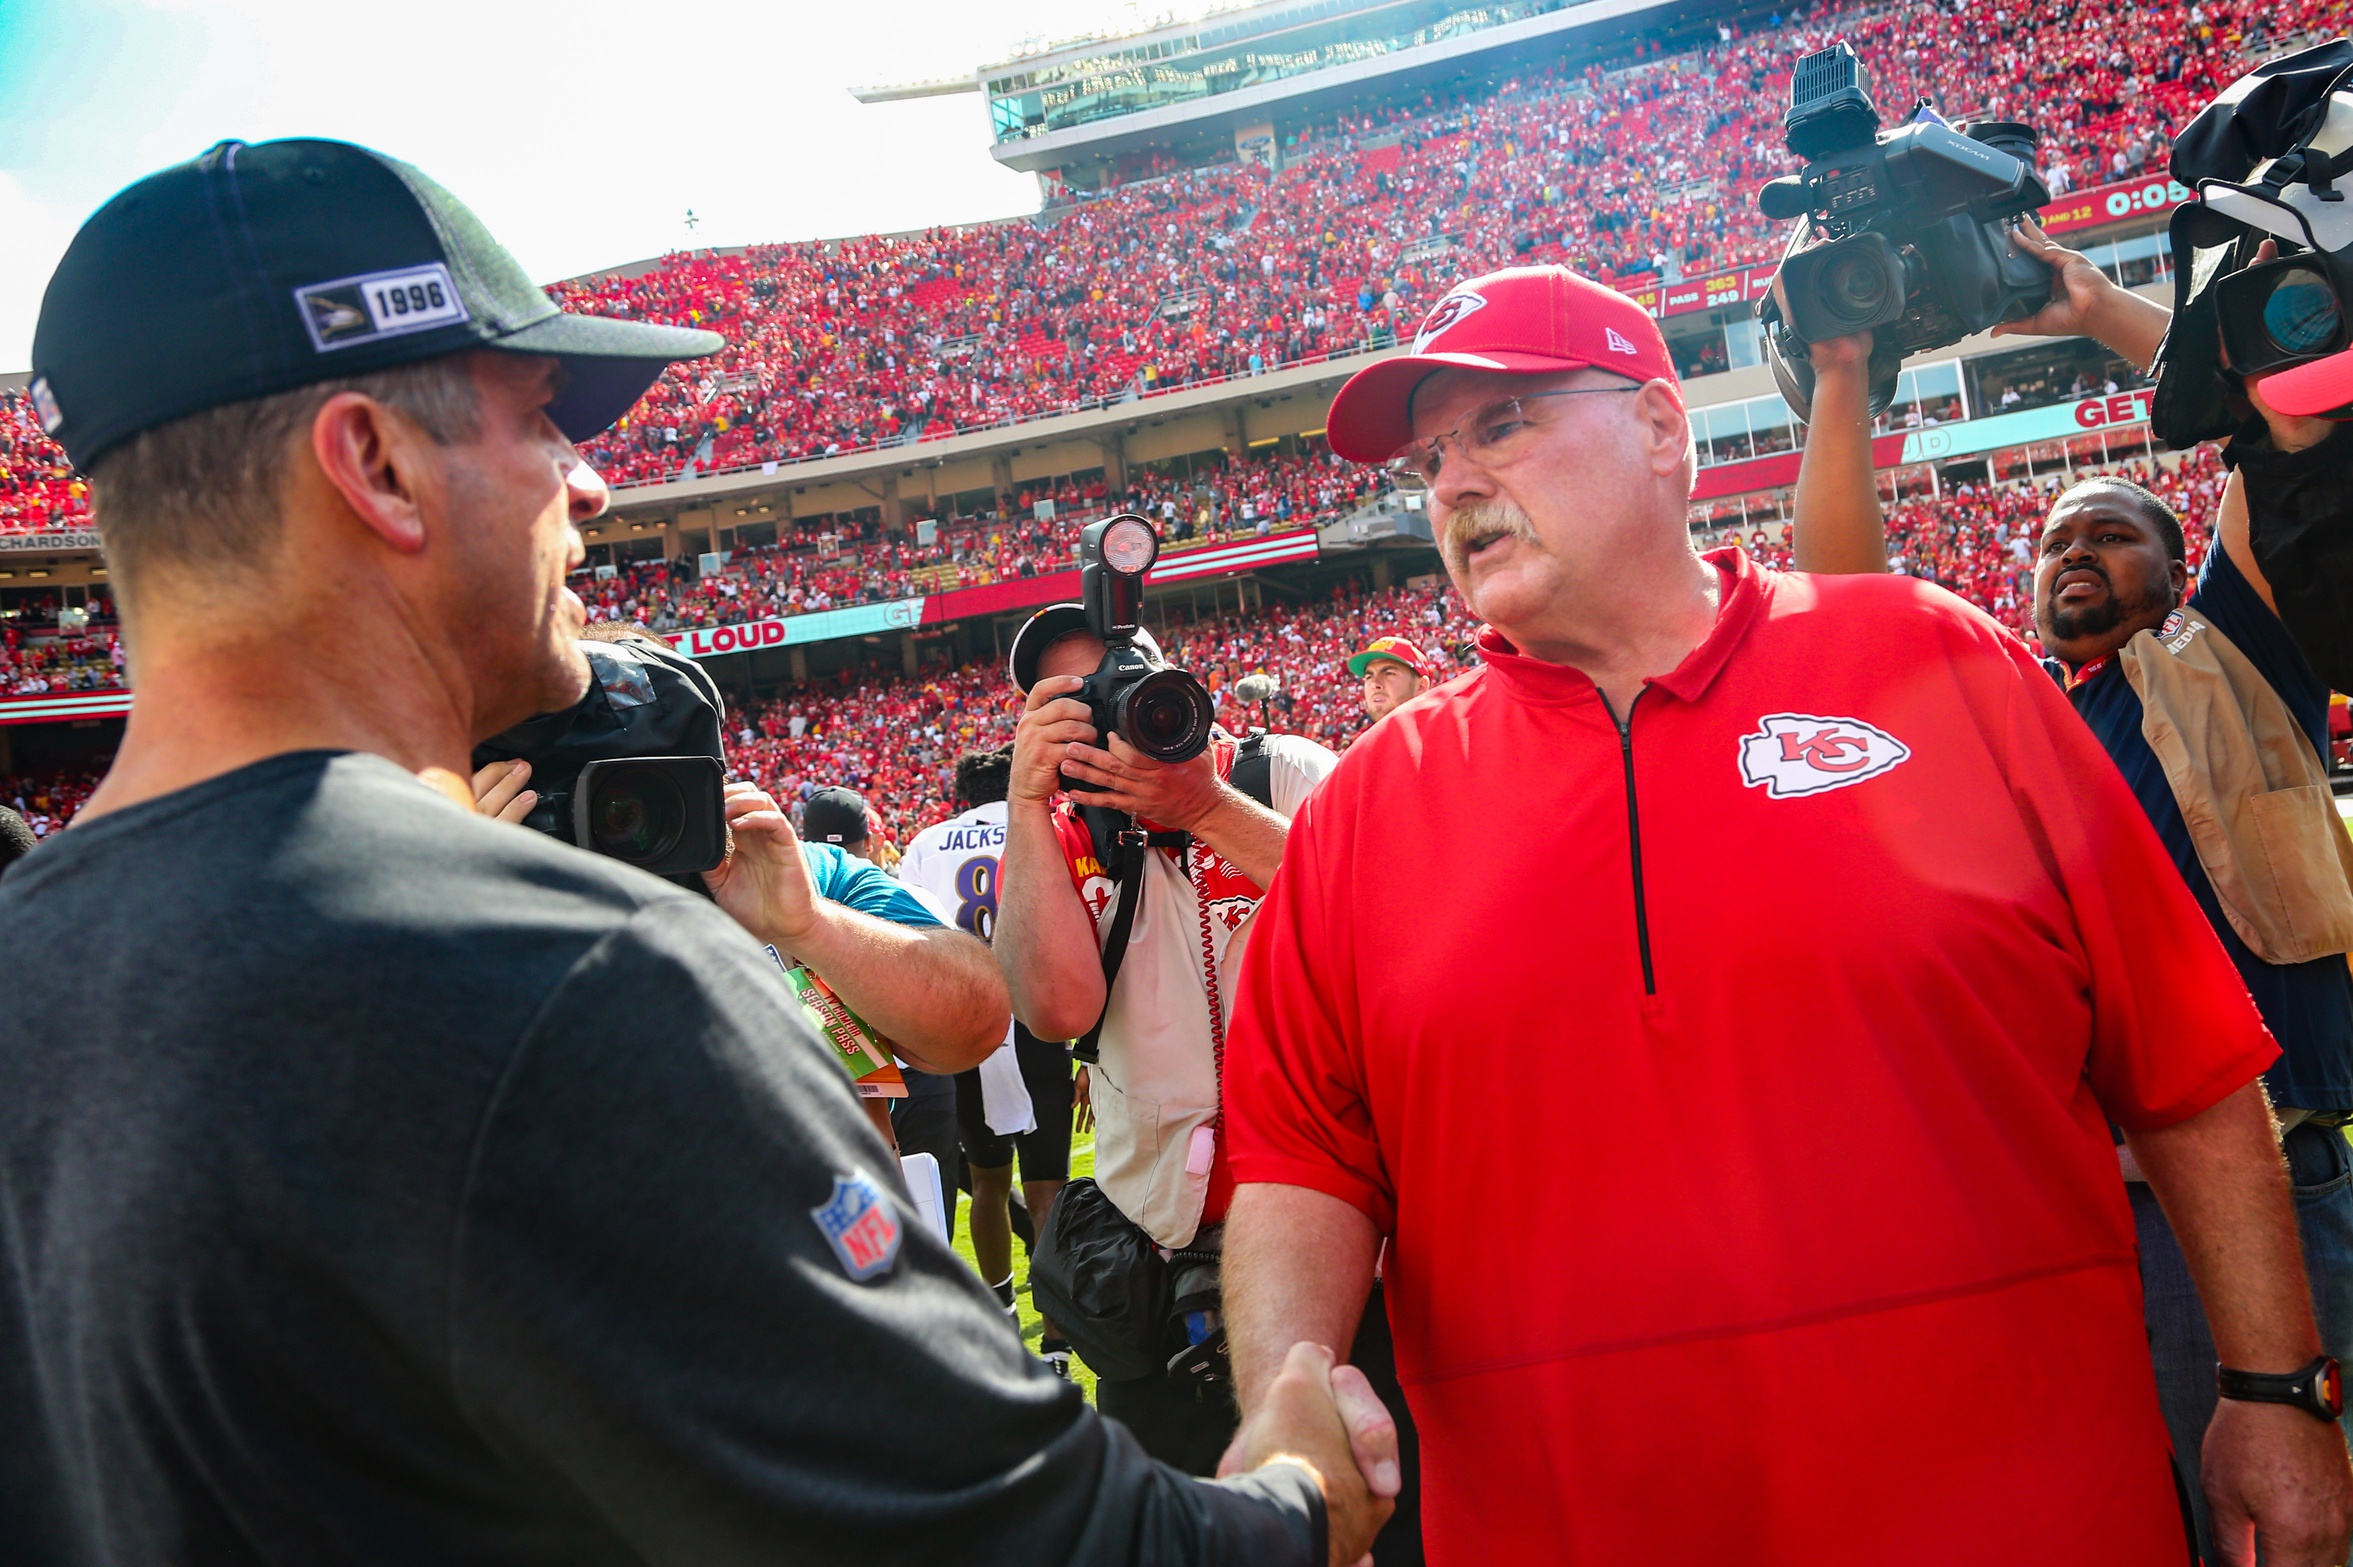 Ravens coach John Harbaugh and Chiefs coach Andy Reid have had their share of success as assistant coaches and head coaches in the NFL.